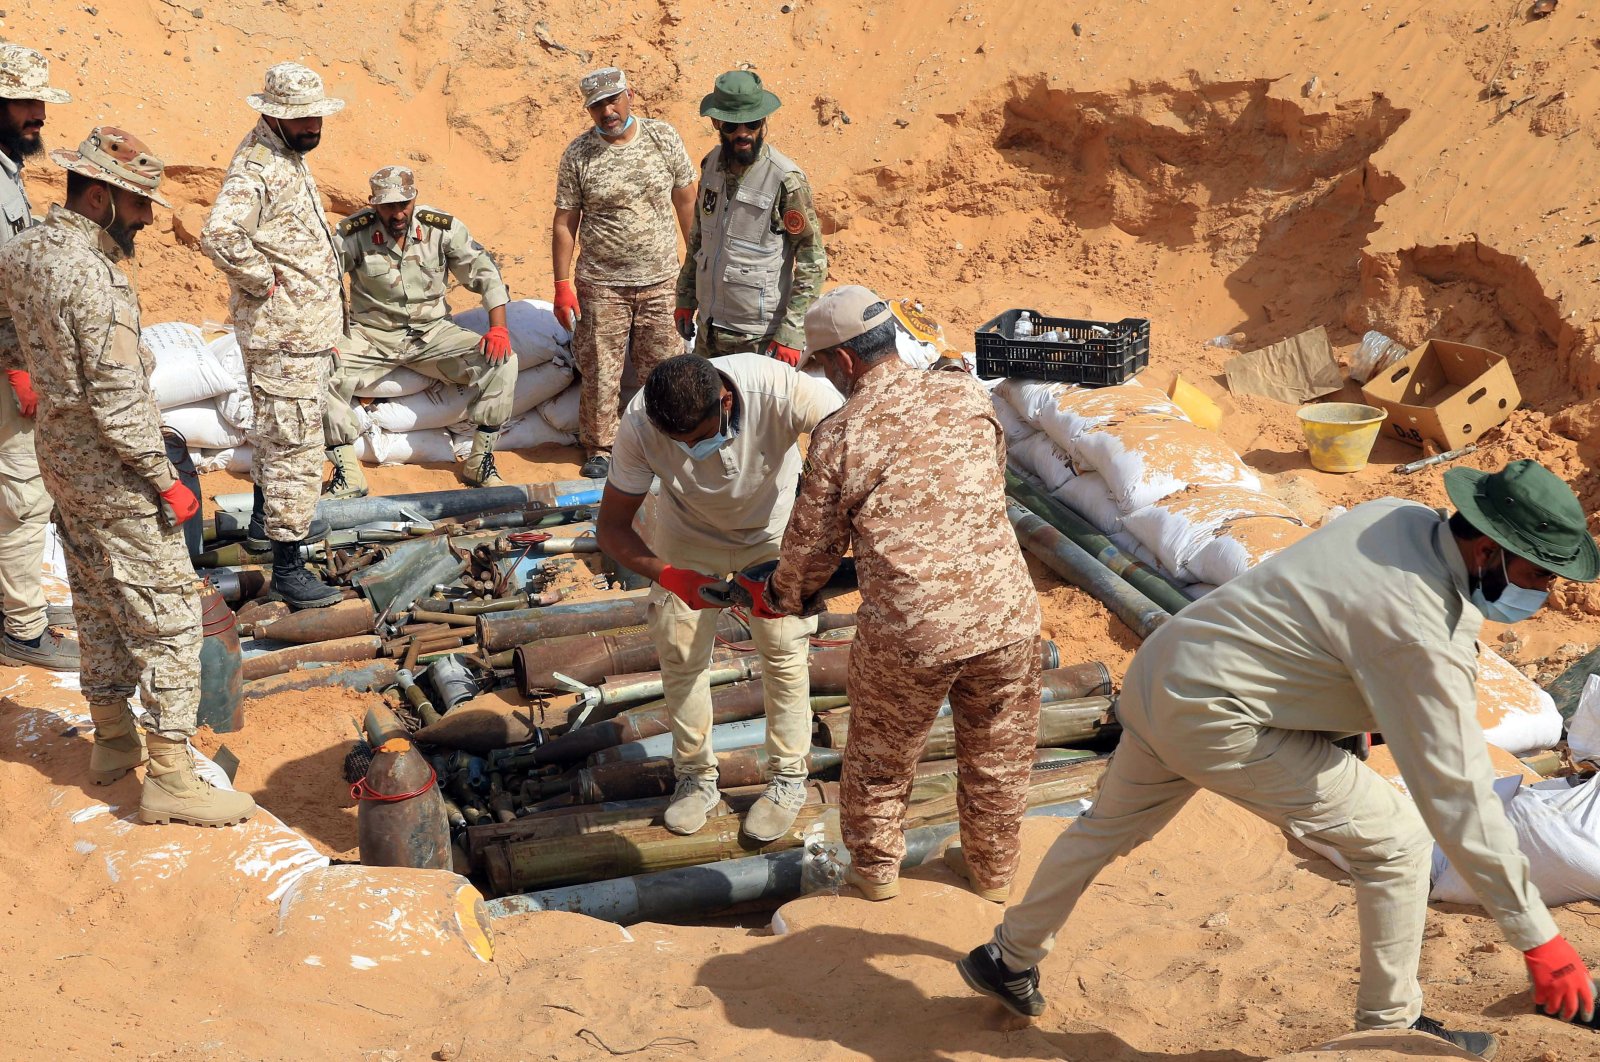 Military engineers of the U.N.-recognized Libyan Government of National Accord (GNA) prepare to dispose of ammunition and explosives in Tripoli, Libya, Oct. 12, 2020. (EPA Photo)